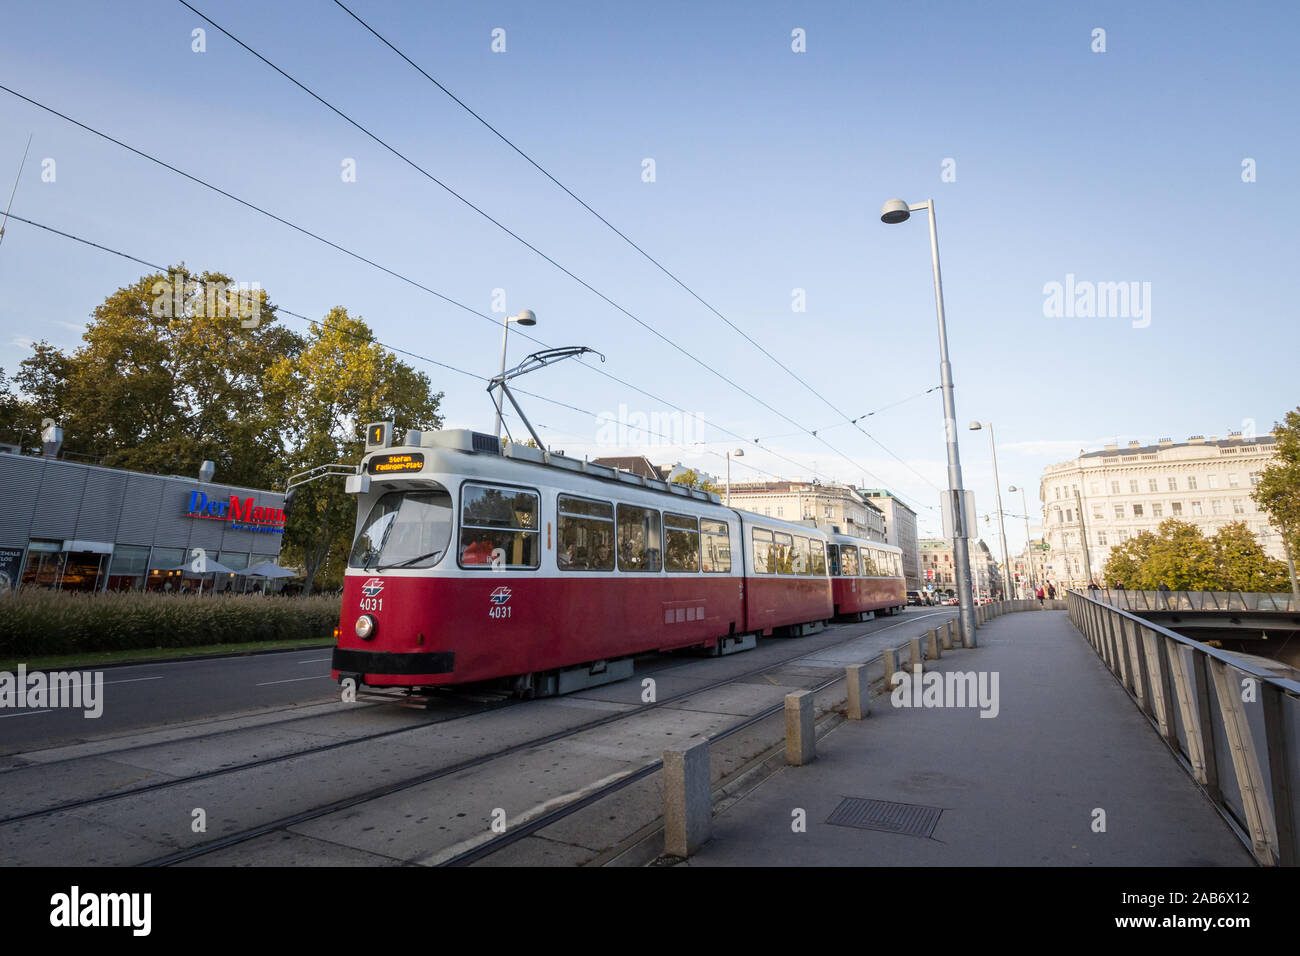 VIENNA, AUSTRIA - NOVEMBER 6, 2019: Vienna tram, also called strassenbahn, an old and traditional modern, passing by on the iconic ringstrasse in the Stock Photo